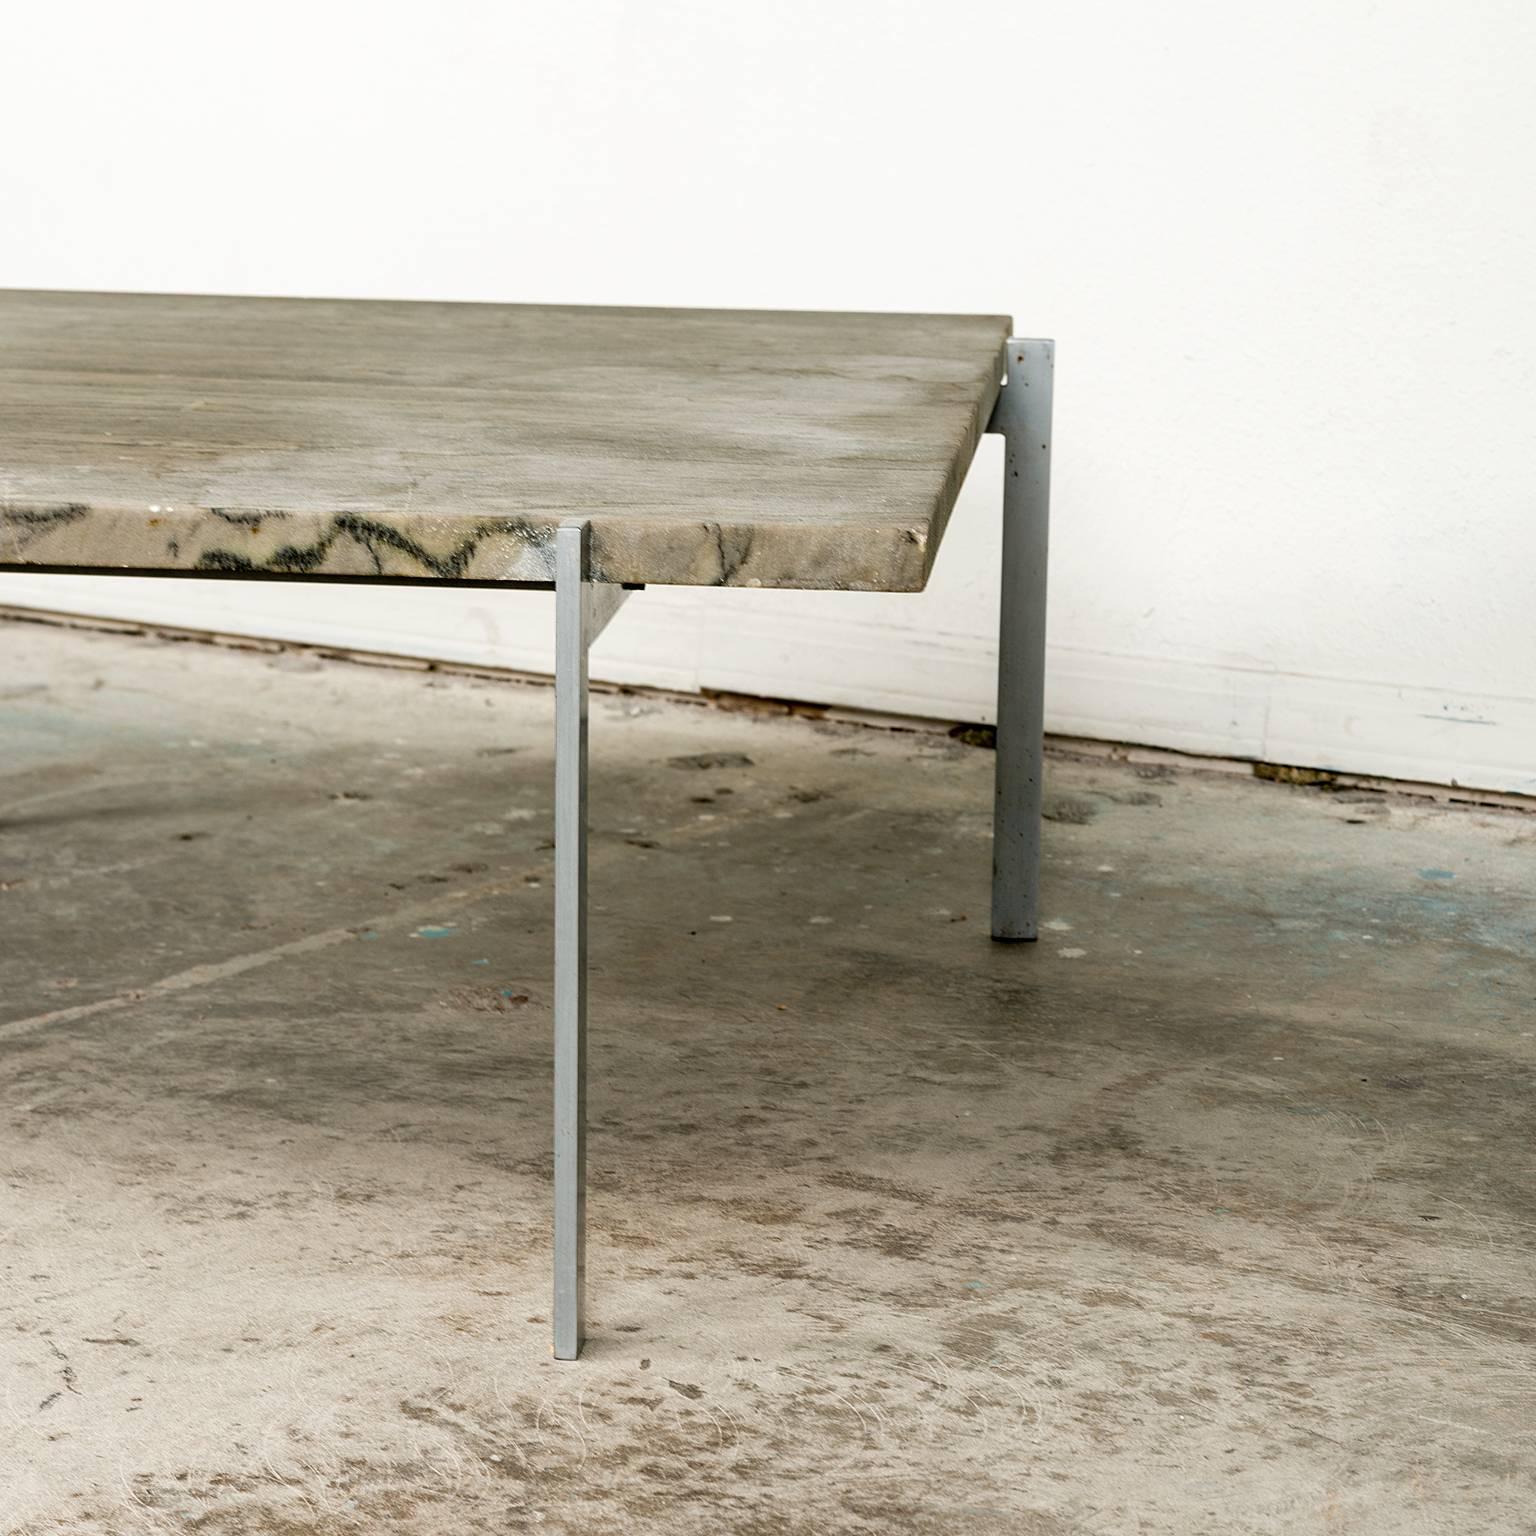 Early PK 61 coffee table by Poul Kjærholm in Cipollino marble. Frame in matte chrome-plated steel. Designed 1956. This example manufactured circa 1961.